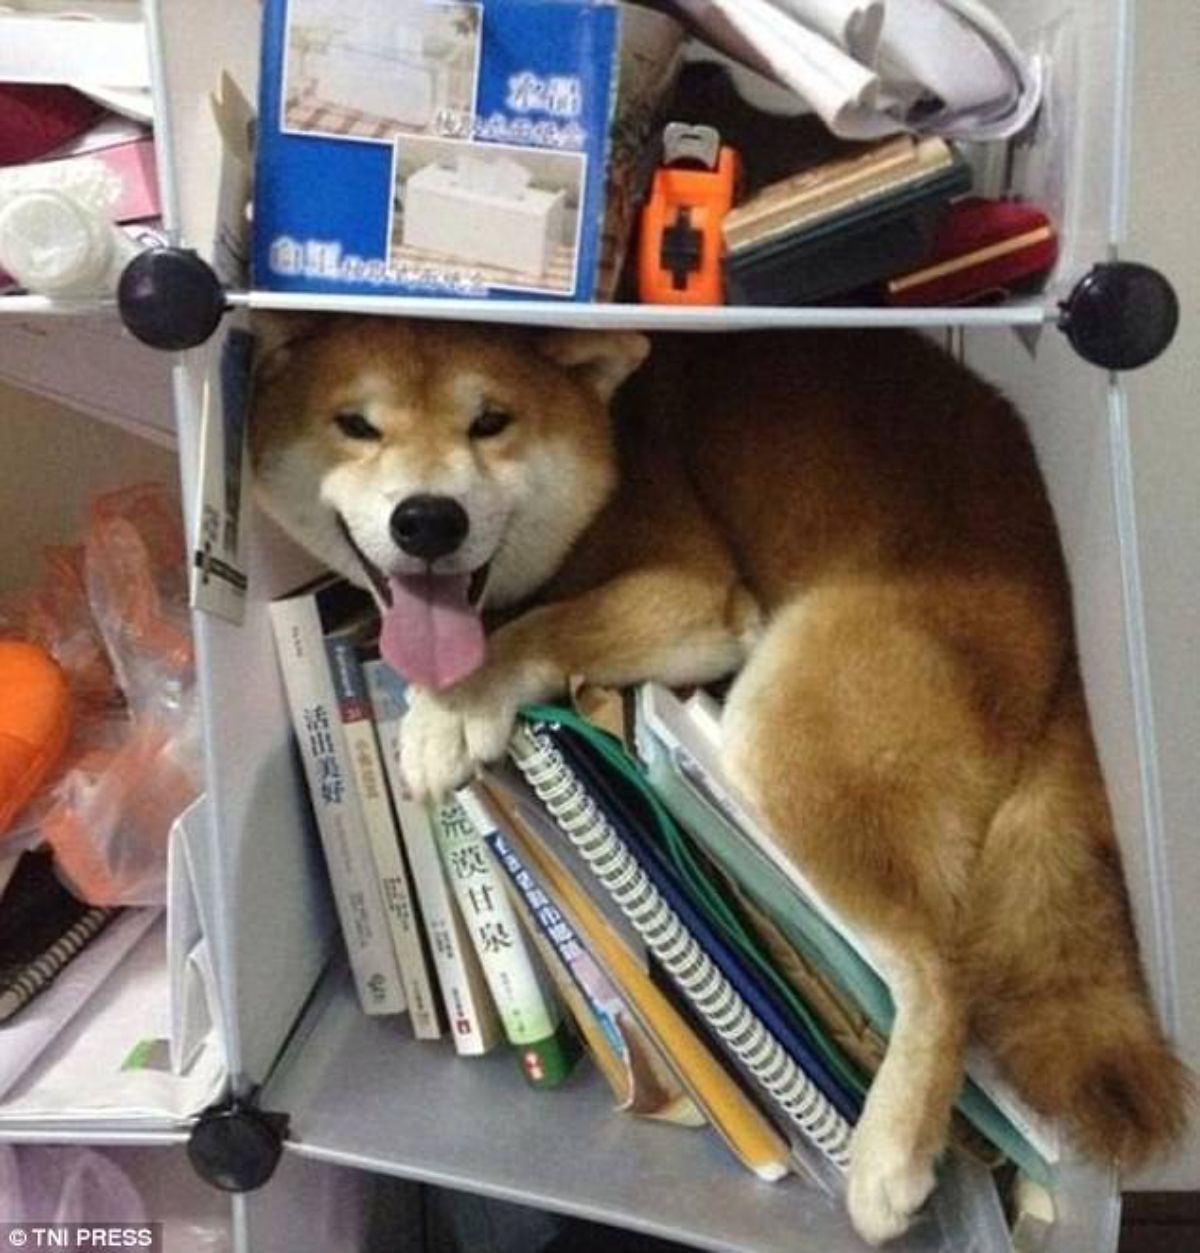 brown and white shiba inu in a small bookshelf on top of some books